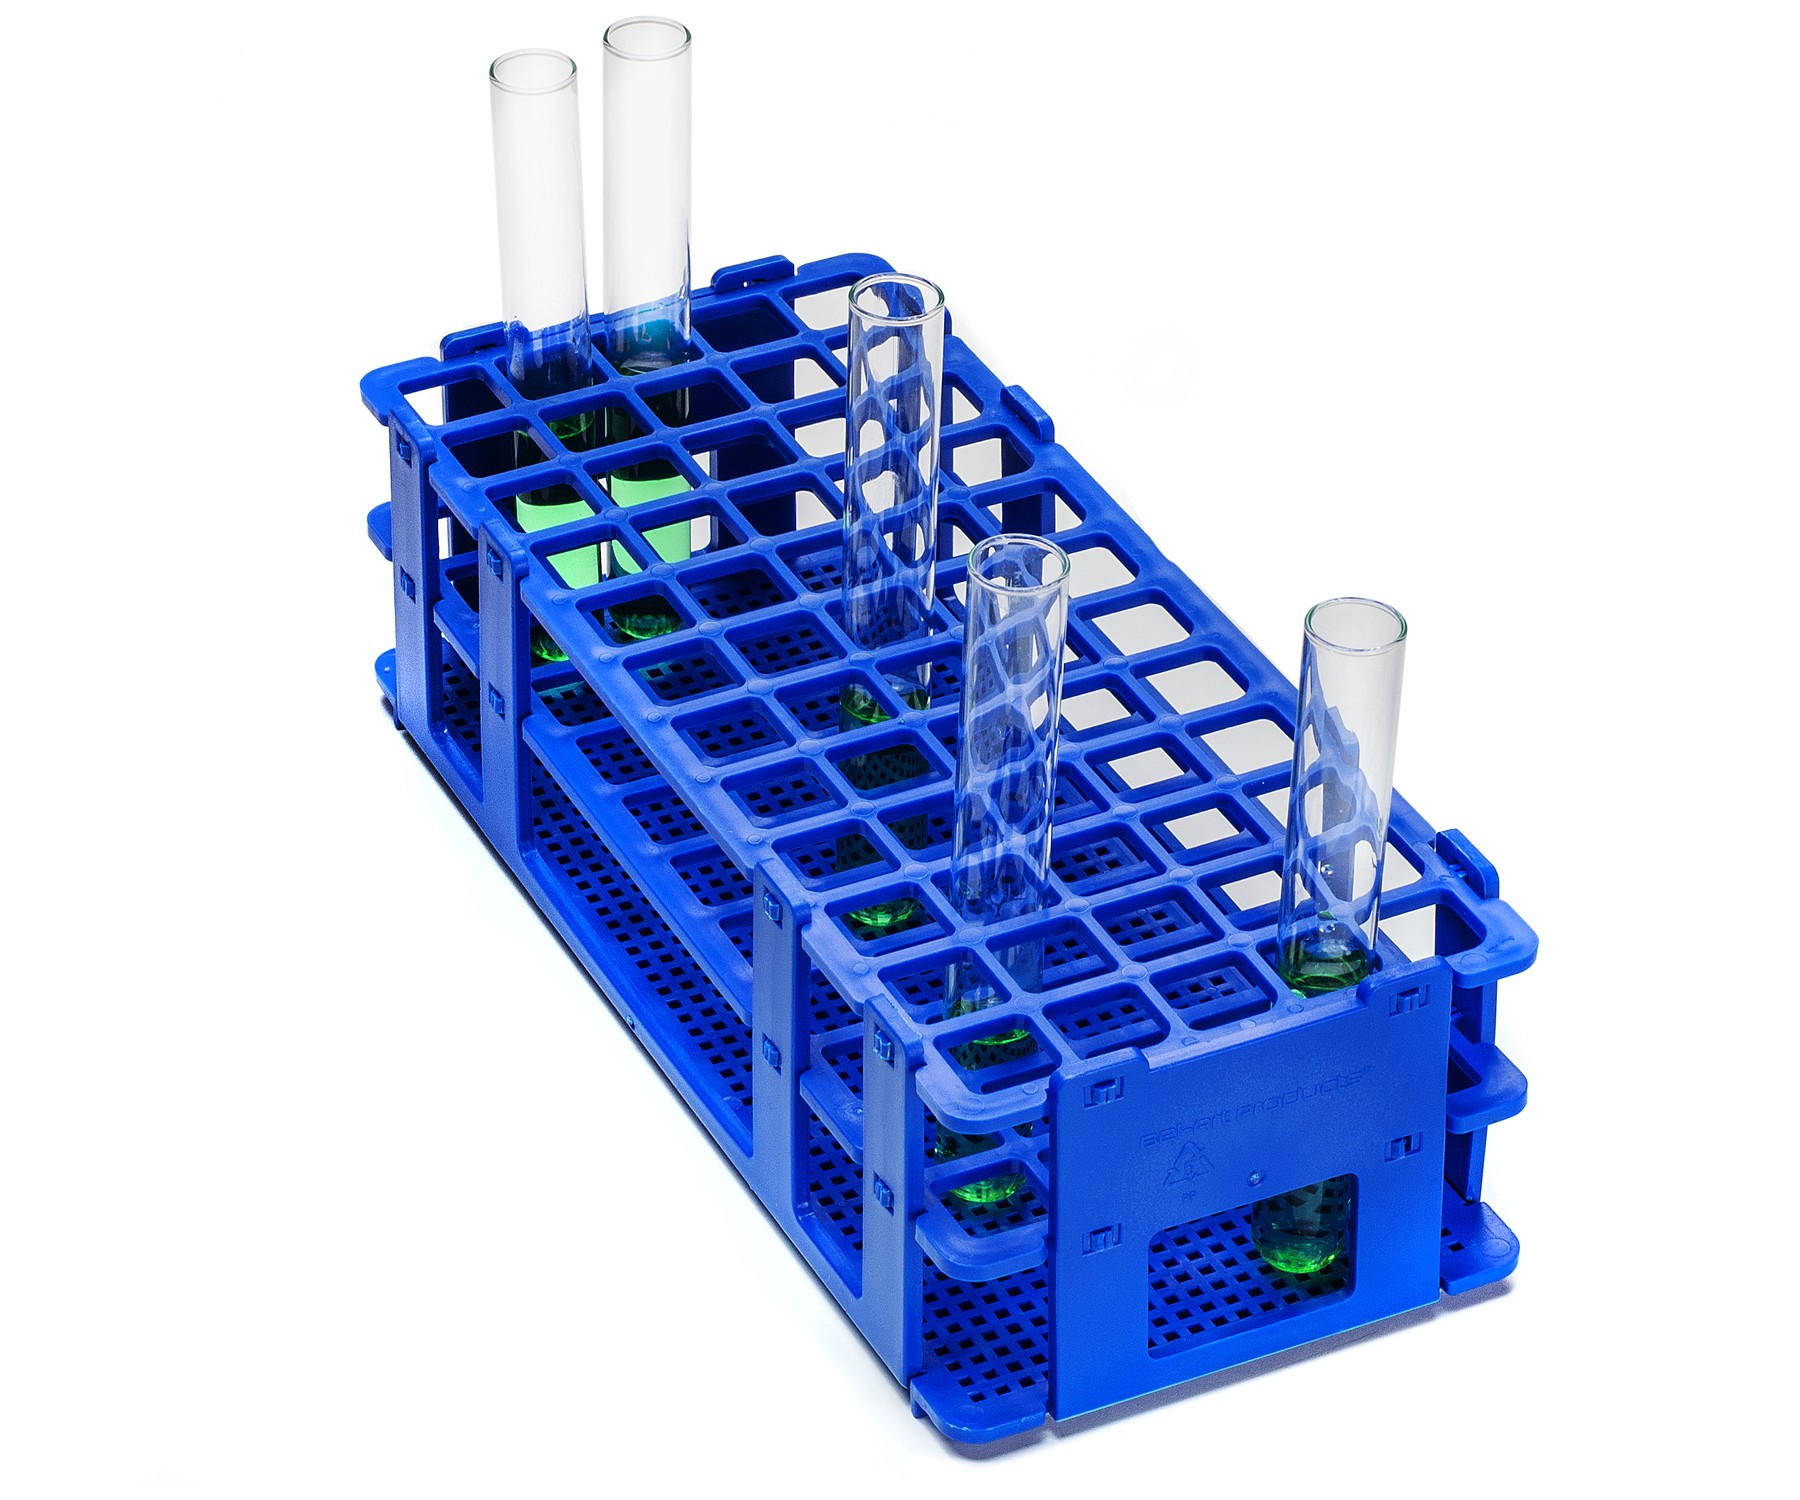 SP Bel-Art No-Wire Test Tube Rack; For 13-16mm Tubes, 60 Places, Blue